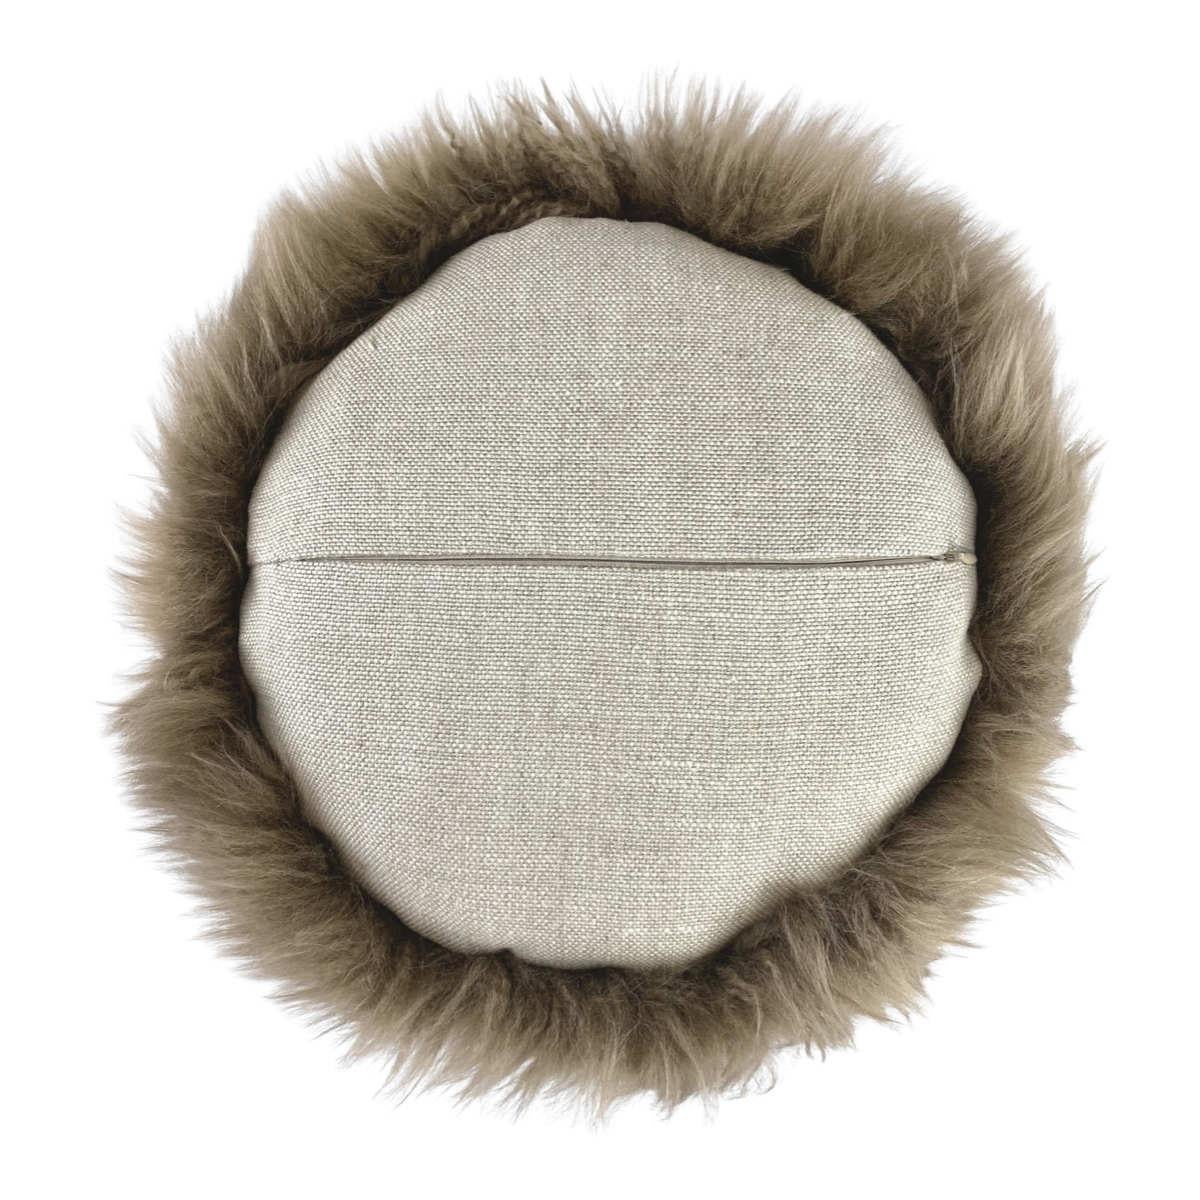 Introduce cozy textures to everyday living with this round fur pillow. Irresistibly soft and plush, the fluffy pillow is hand-crafted from beautiful high-quality New Zealand lambskin. 

Translating luxury, comfort, and sustainable design, each